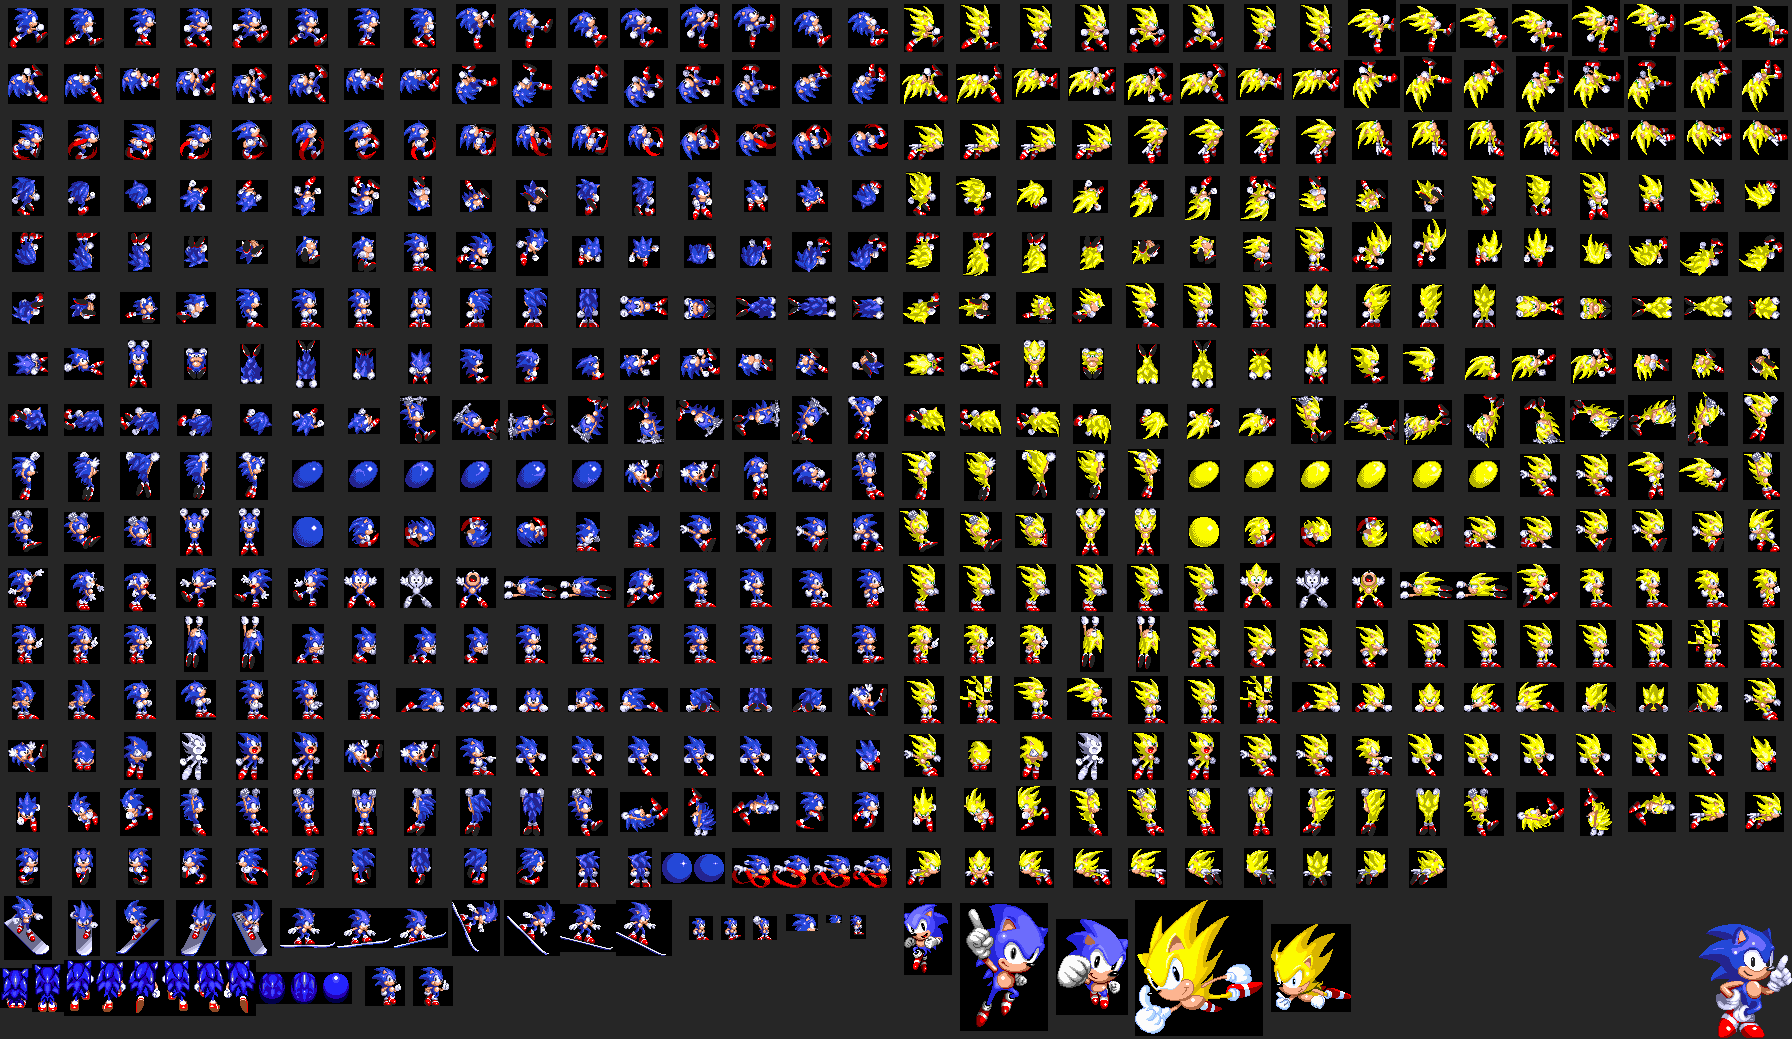 Sonic 3 A.I.R.) Does anyone know how to fix this? It happens on a